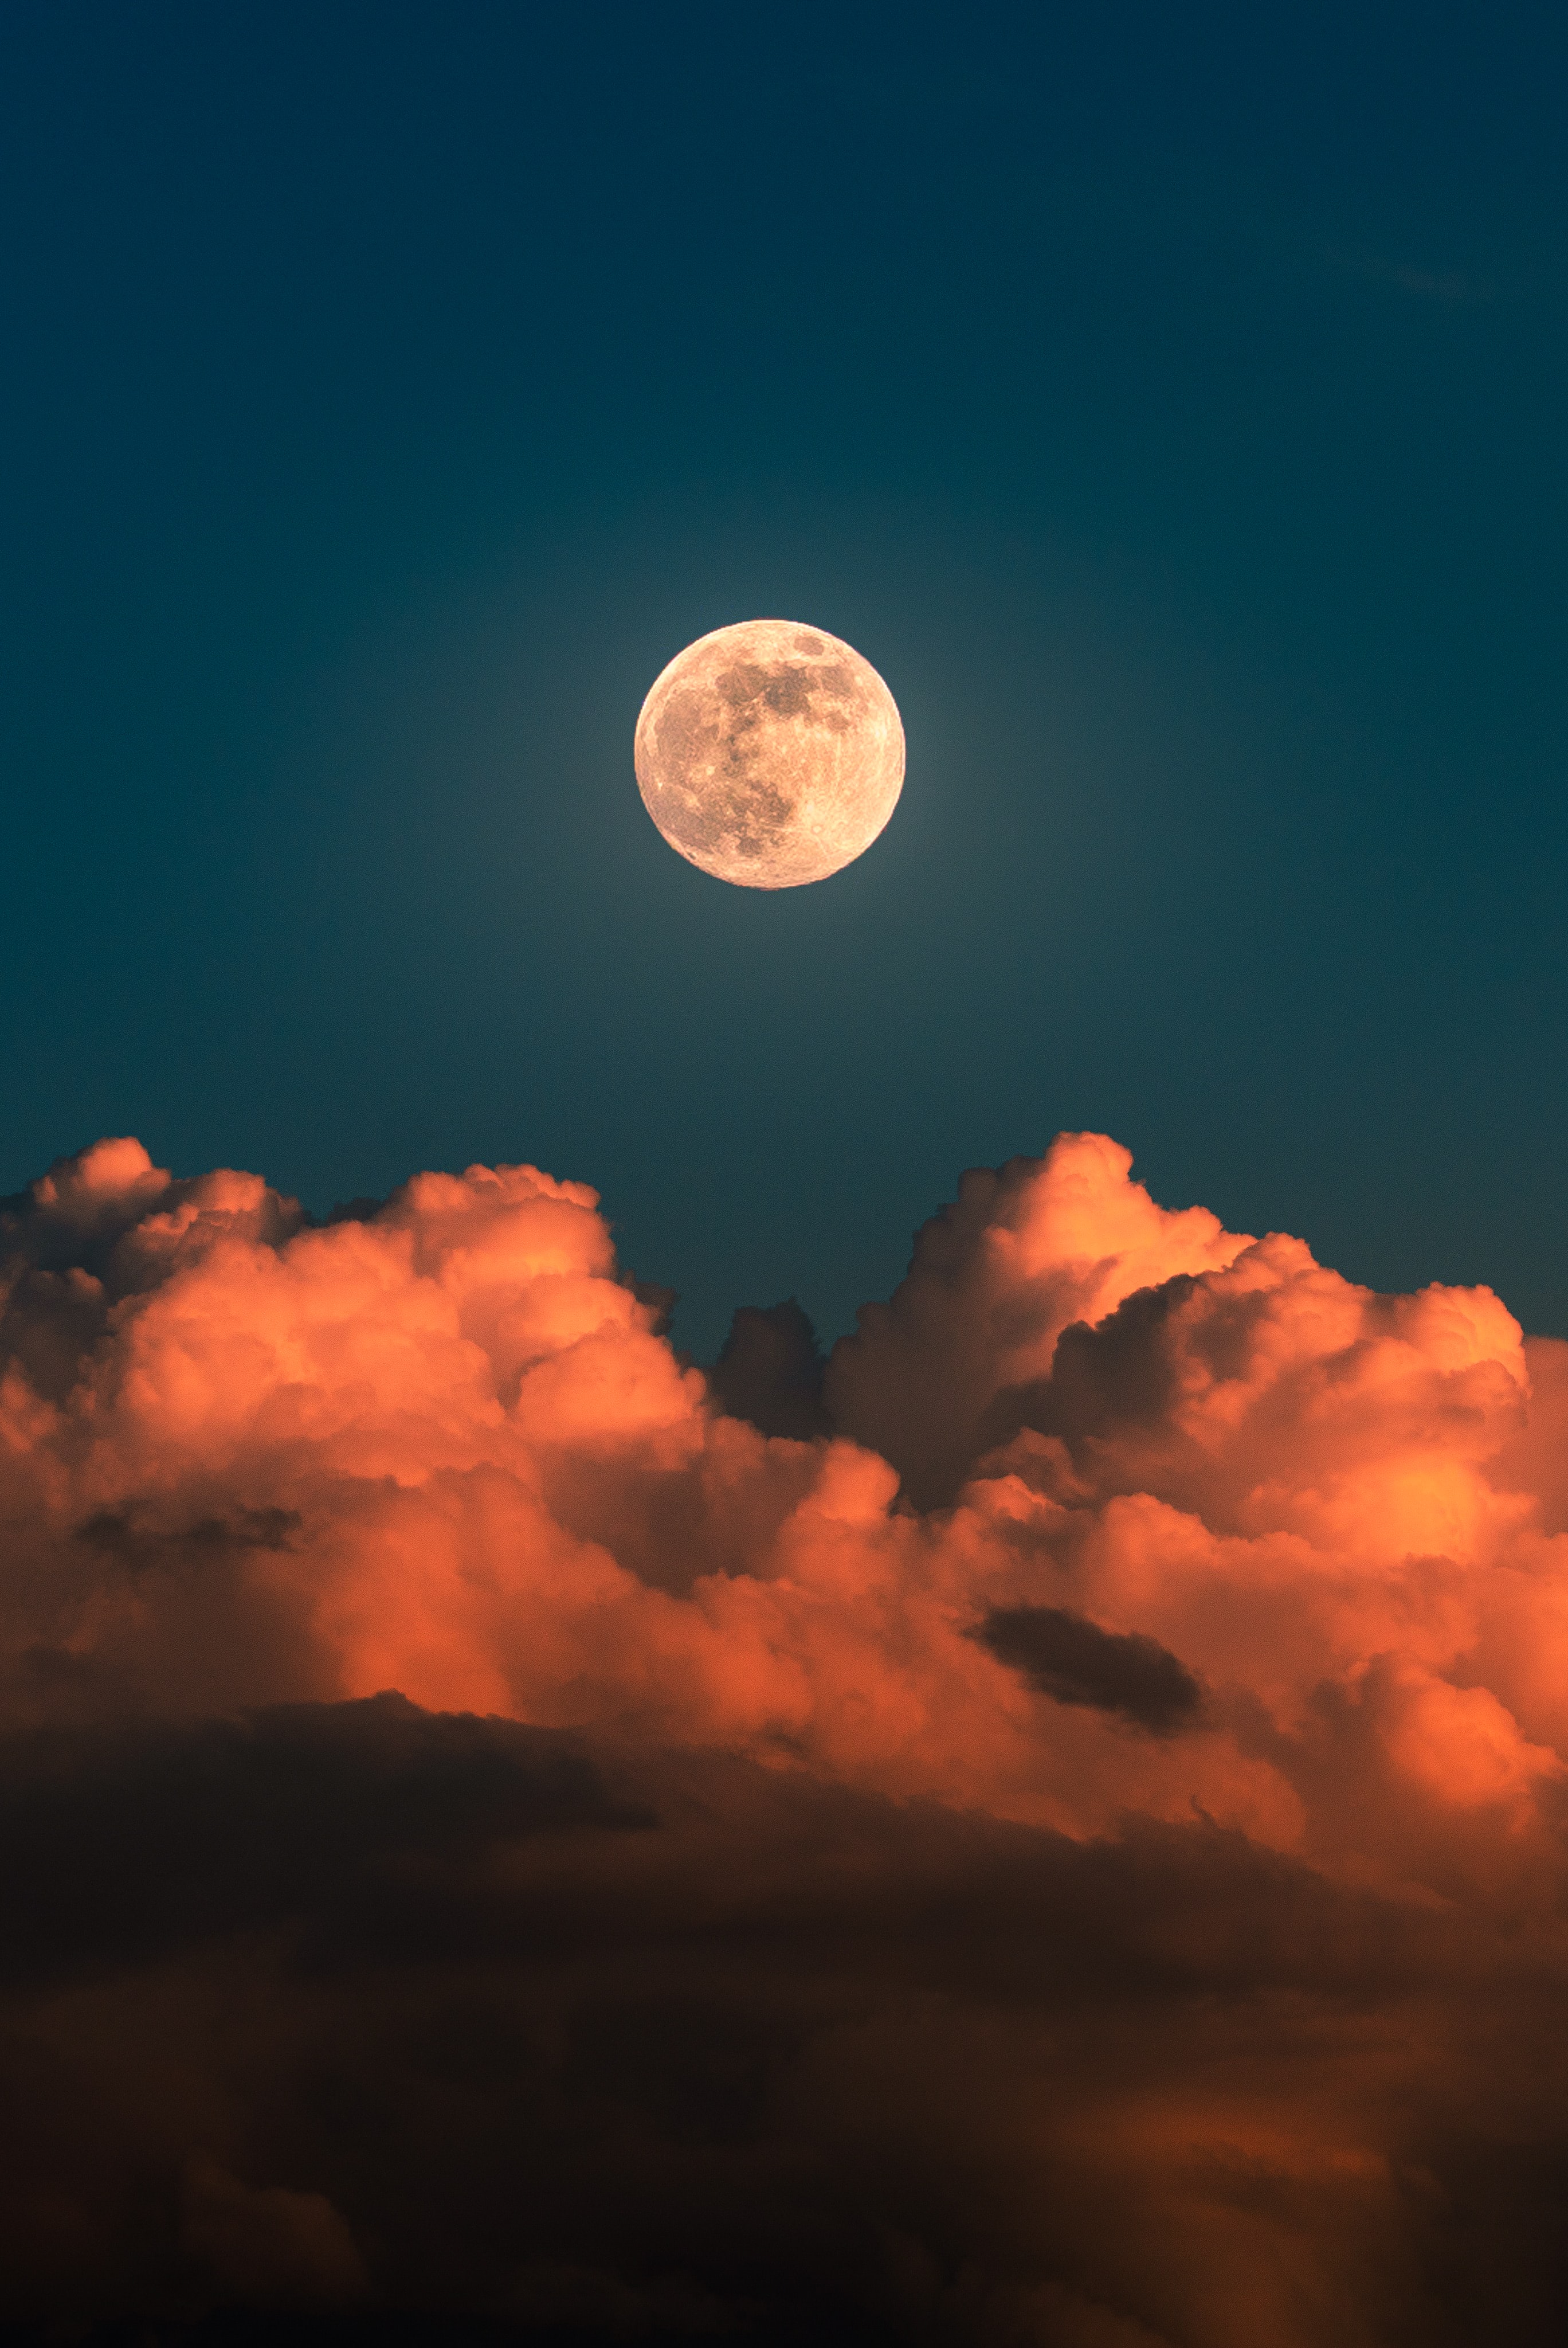 Free HD moon, nature, sky, clouds, full moon